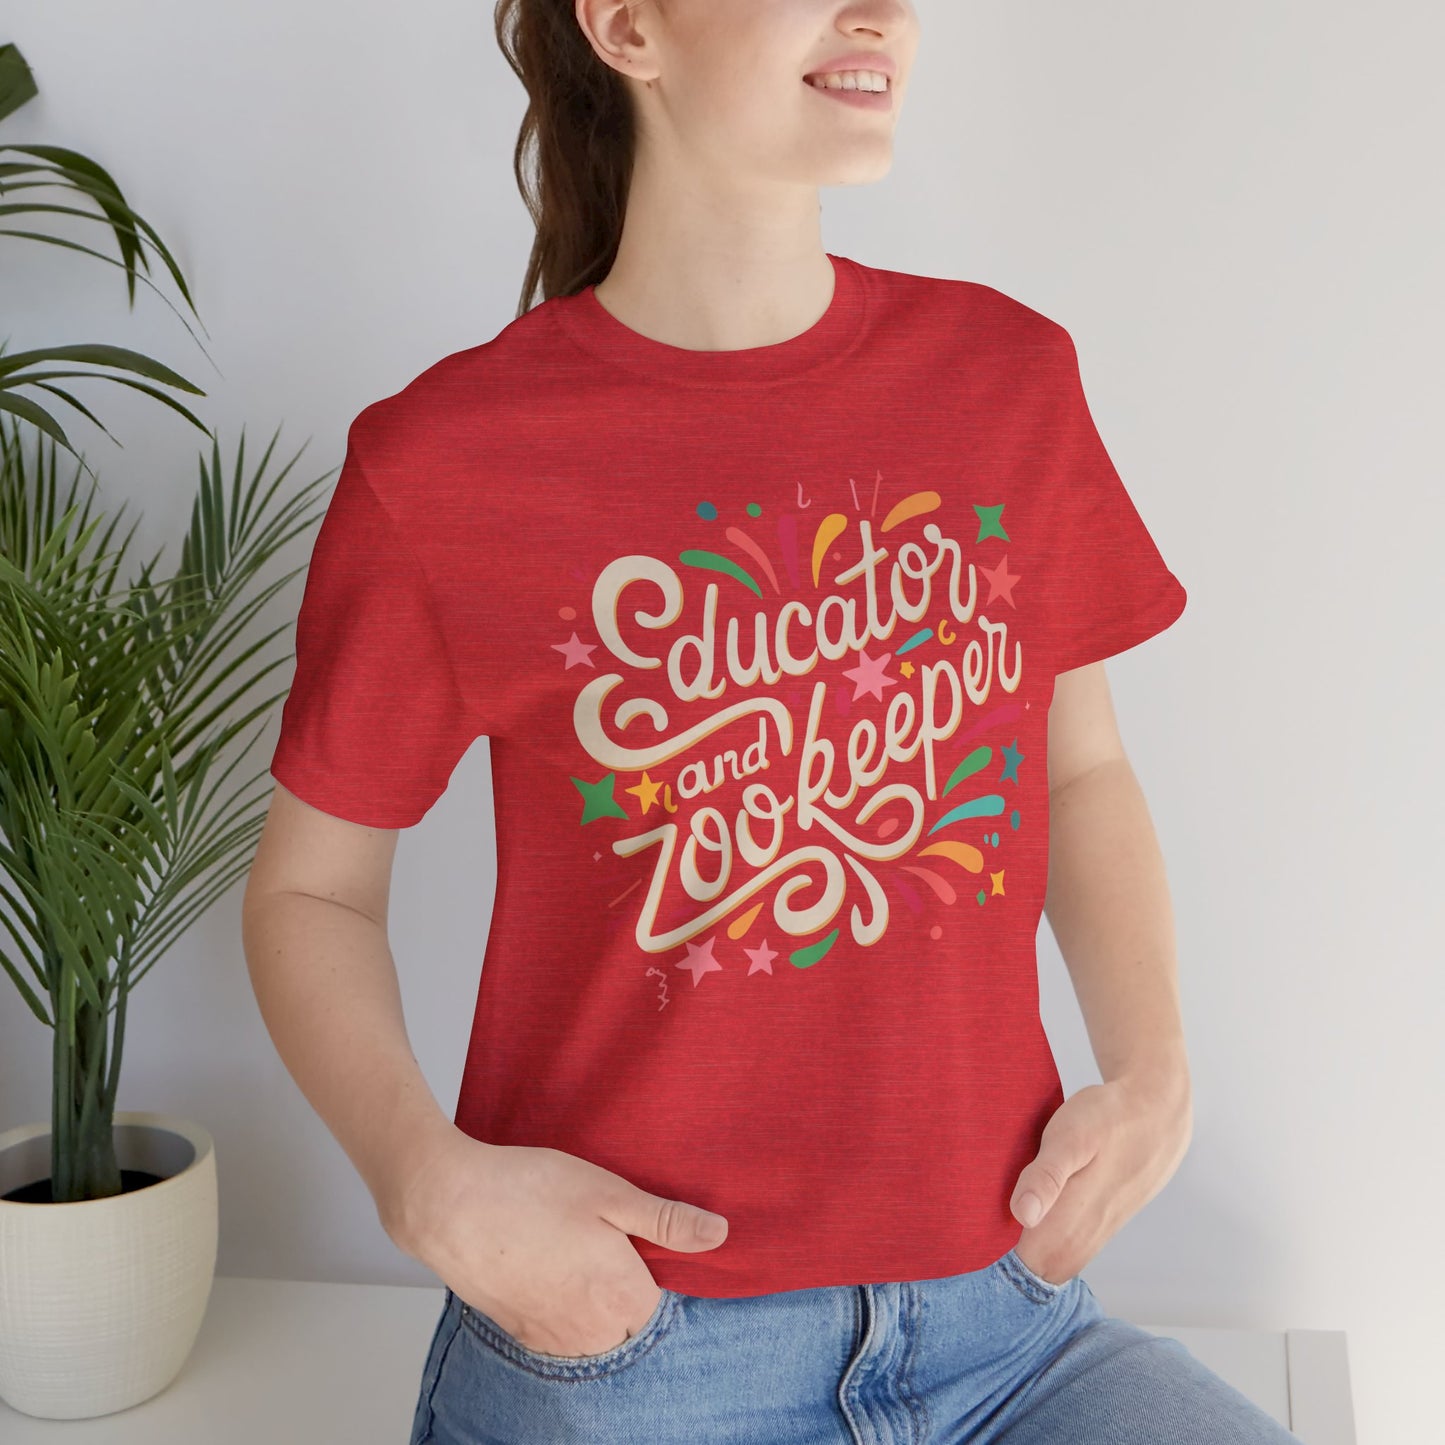 Copy of Teacher T-shirt - "Educator and Zookeeper"